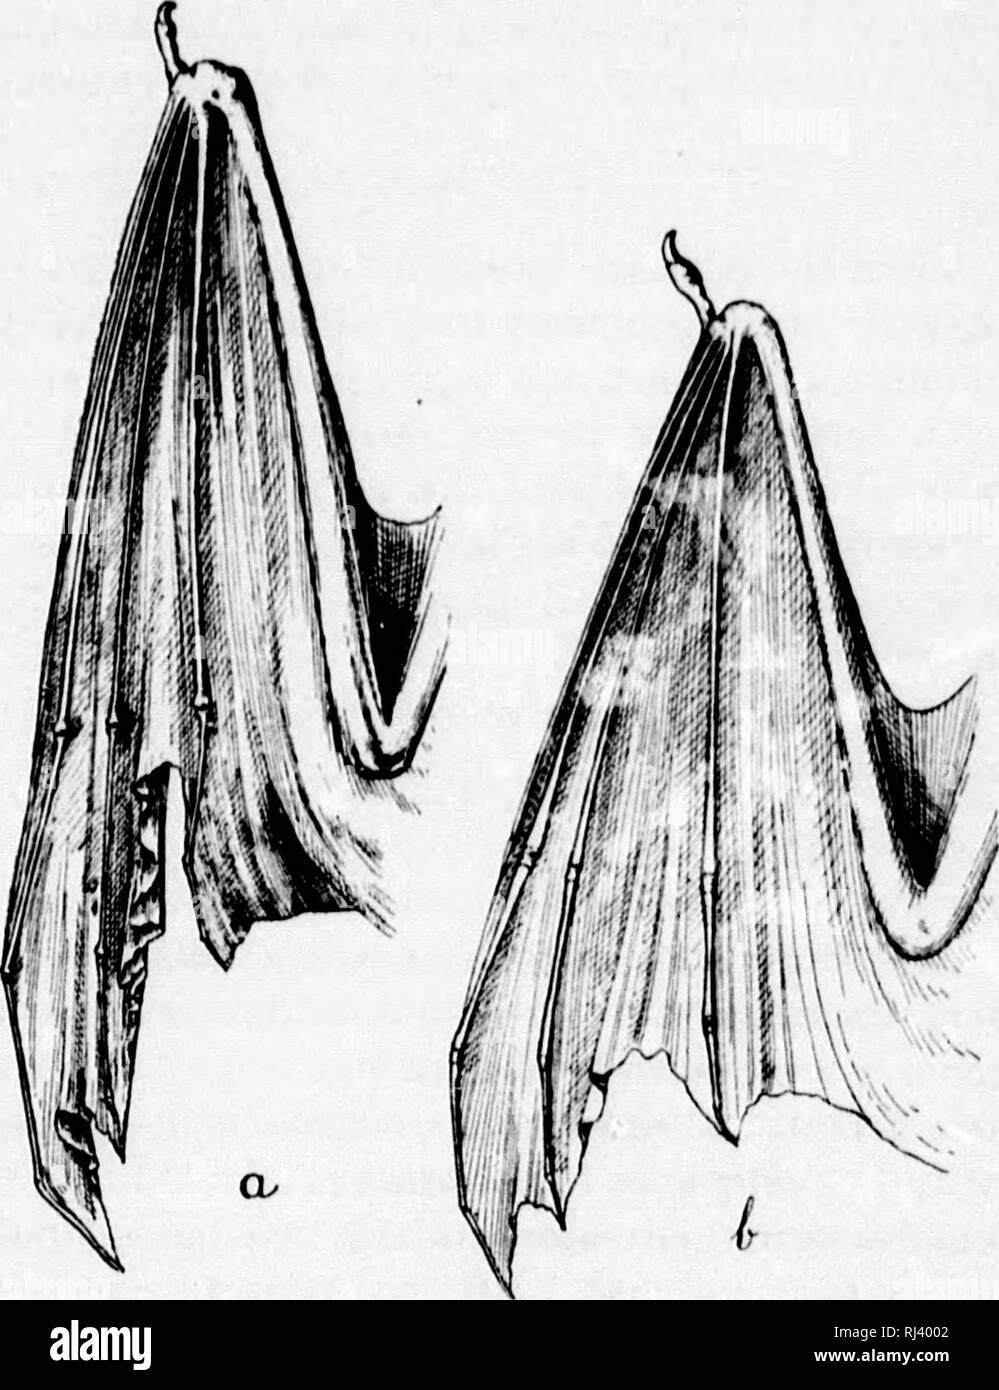 . Revisions of the North American bats of the family Vespertilionid[a]e [microform]. Bats; Chauves-souris. OKOORAPHIC VARIATION. iddition to than that of tlieadultHHixl th iiiiiiiatiire Hkull dill'ers in si/.e and torni t'roni that of the adult, but as the sutures disappear at an early ajje. it is (d'ten somewhat ditllcult to recojjni; &lt;,'. 1 have found that tlu- best j;«'f the linger Joints. In spcciinenM young enonjfh to furnish unreliable characters these are always large and loosely formed, with opi|ihyses separate from the ends of the phalanges and metacarpals, bi&gt;th of which are di Stock Photo